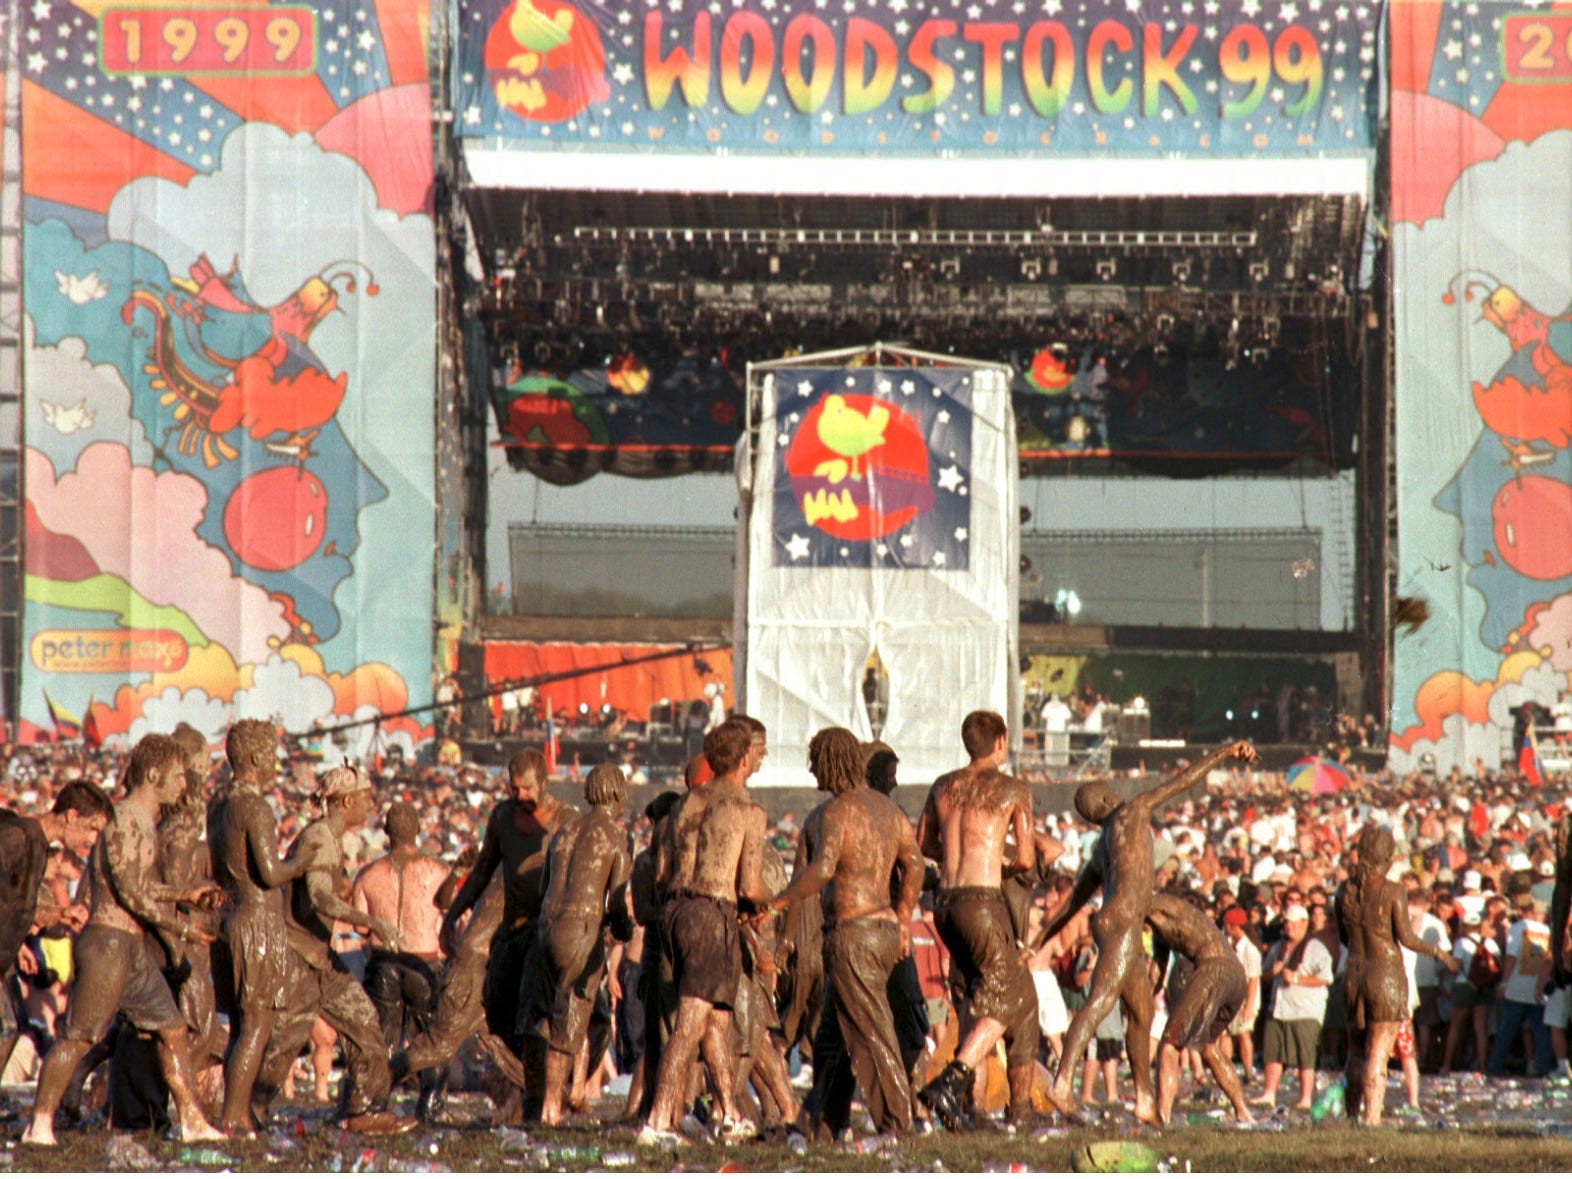 Attendees at Woodstock 99 covered in mud